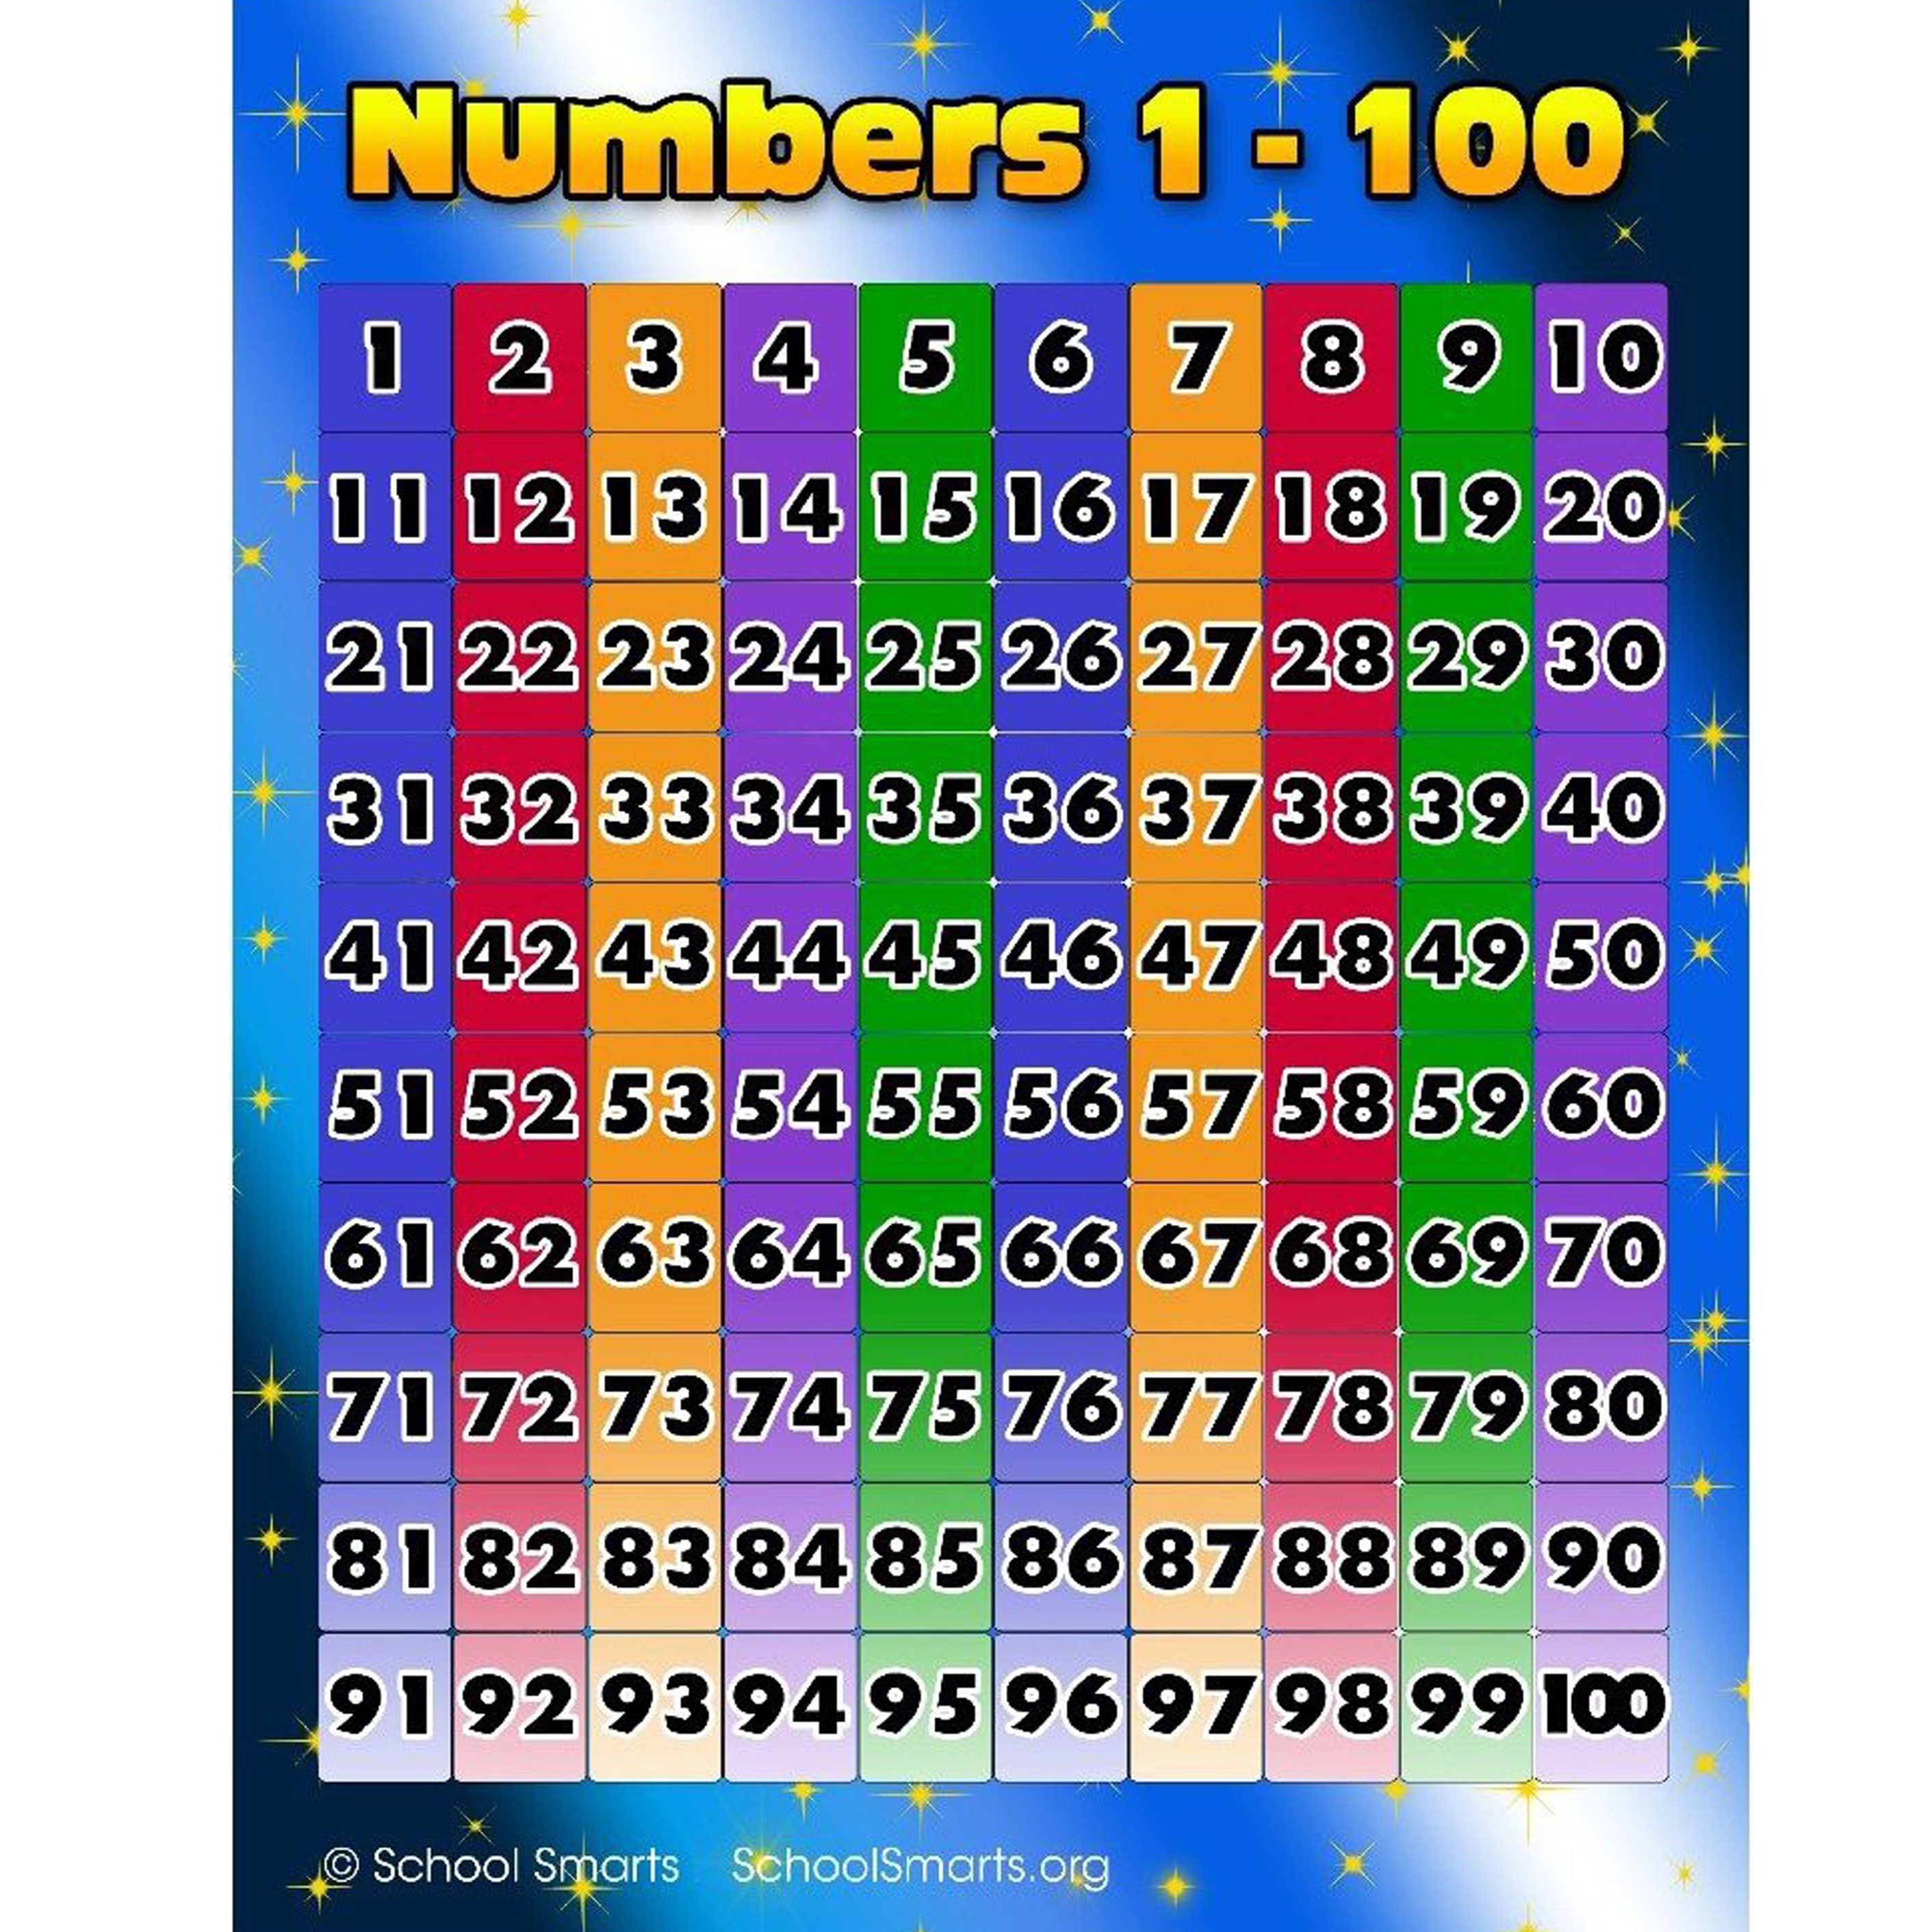 tear-resistant-laminated-numbers-1-100-poster-school-smarts